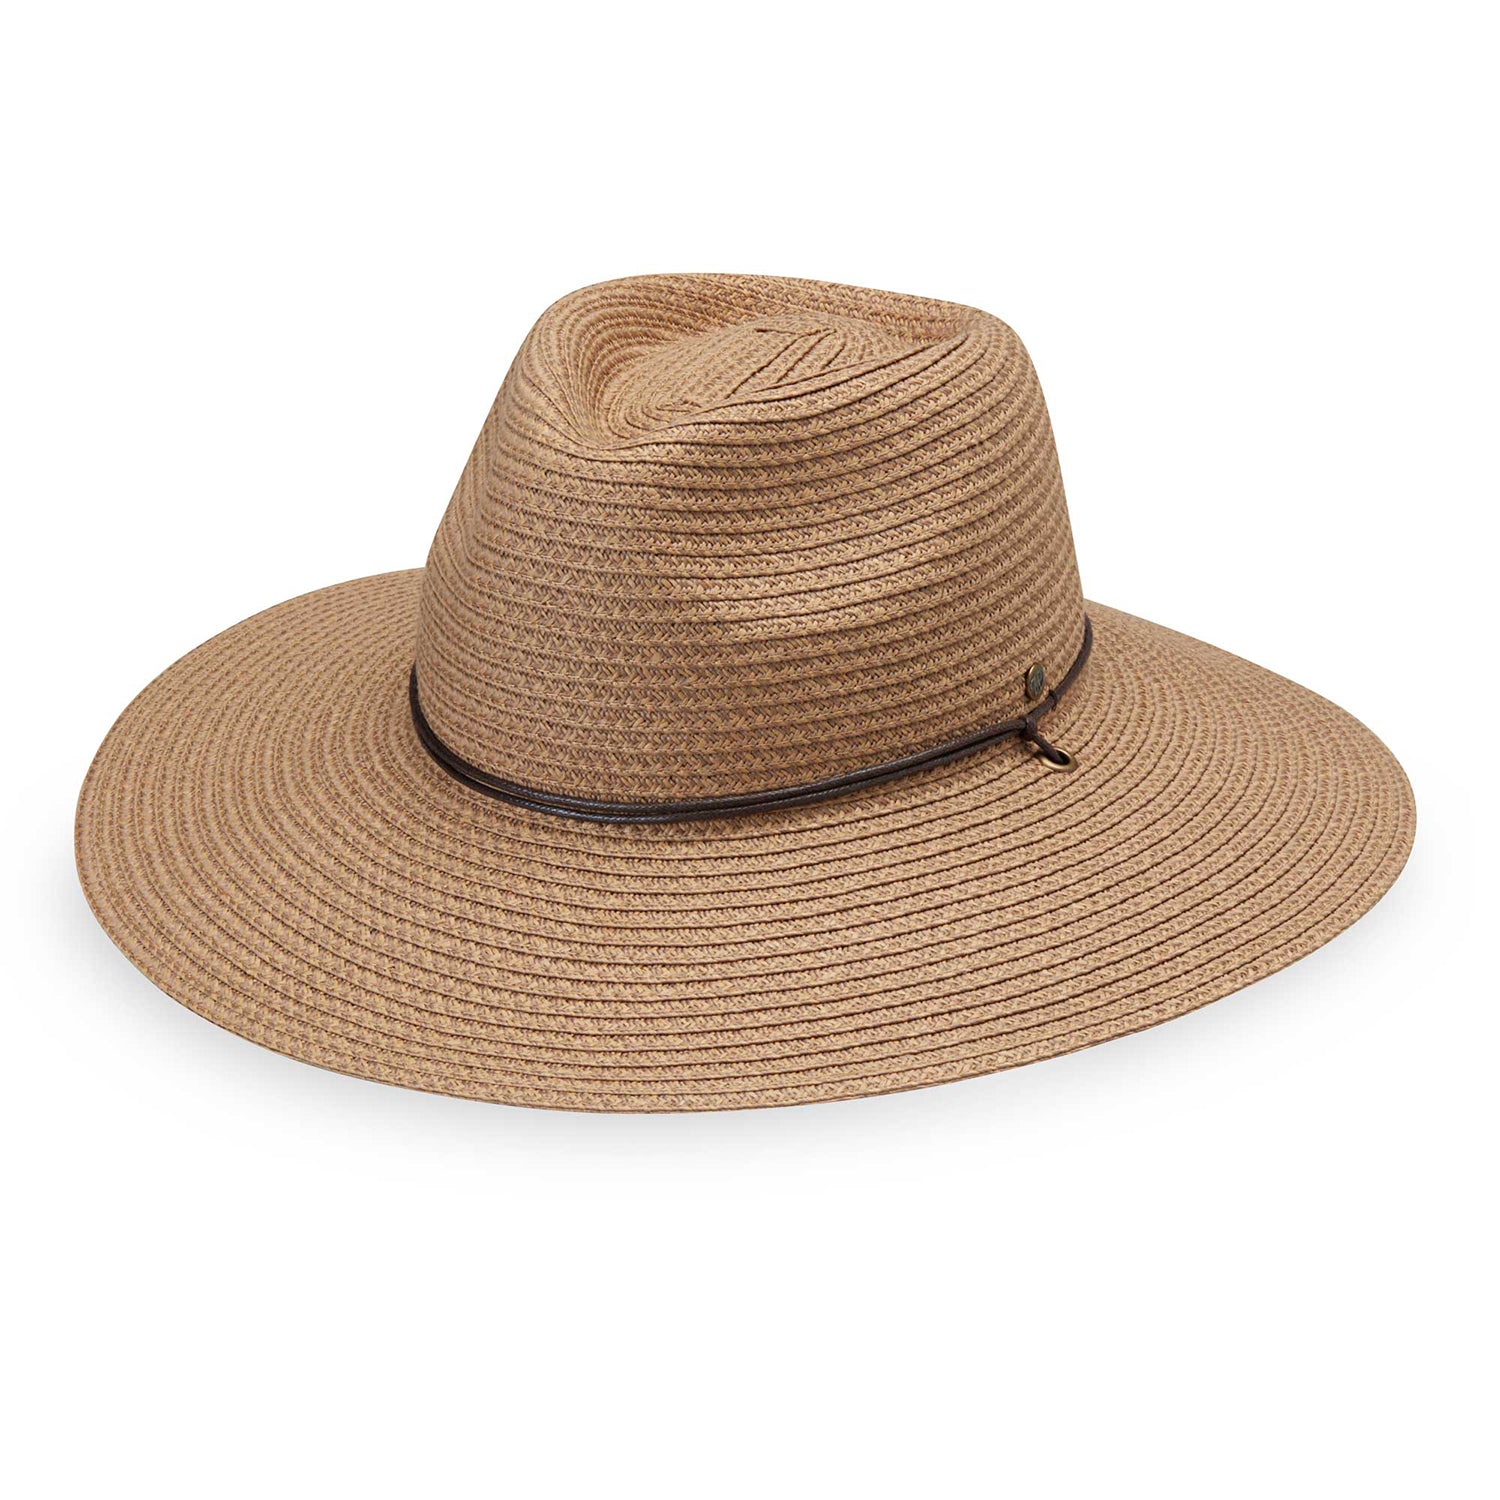 Featuring Ladies Petite Sanibel with a big wide brim and packable material for travel from Wallaroo